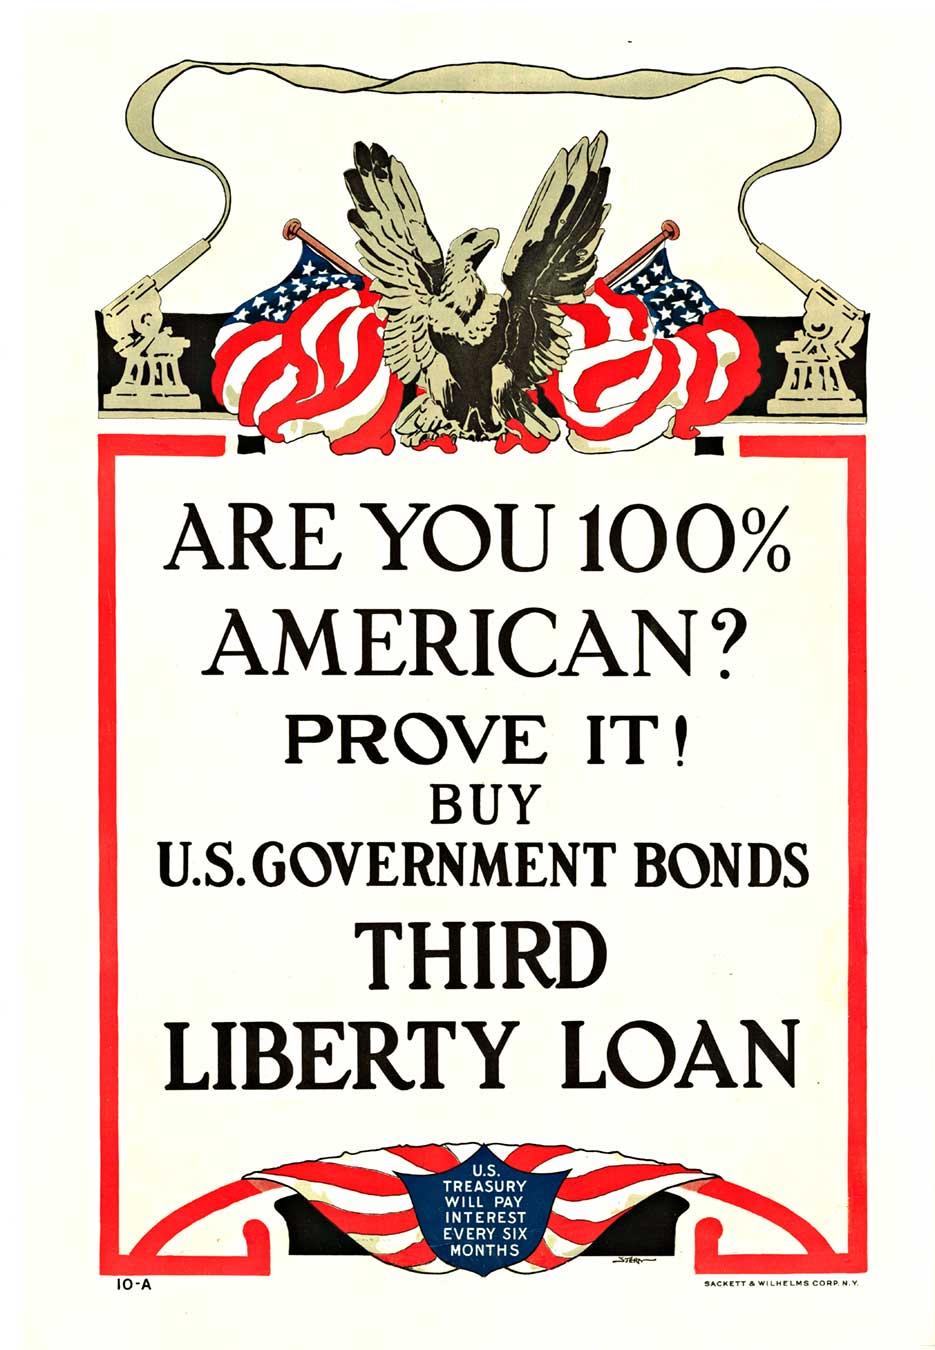 Stern Print - Original "Are You 100% American, Prove It!  Third Liberty Loan vintage poster